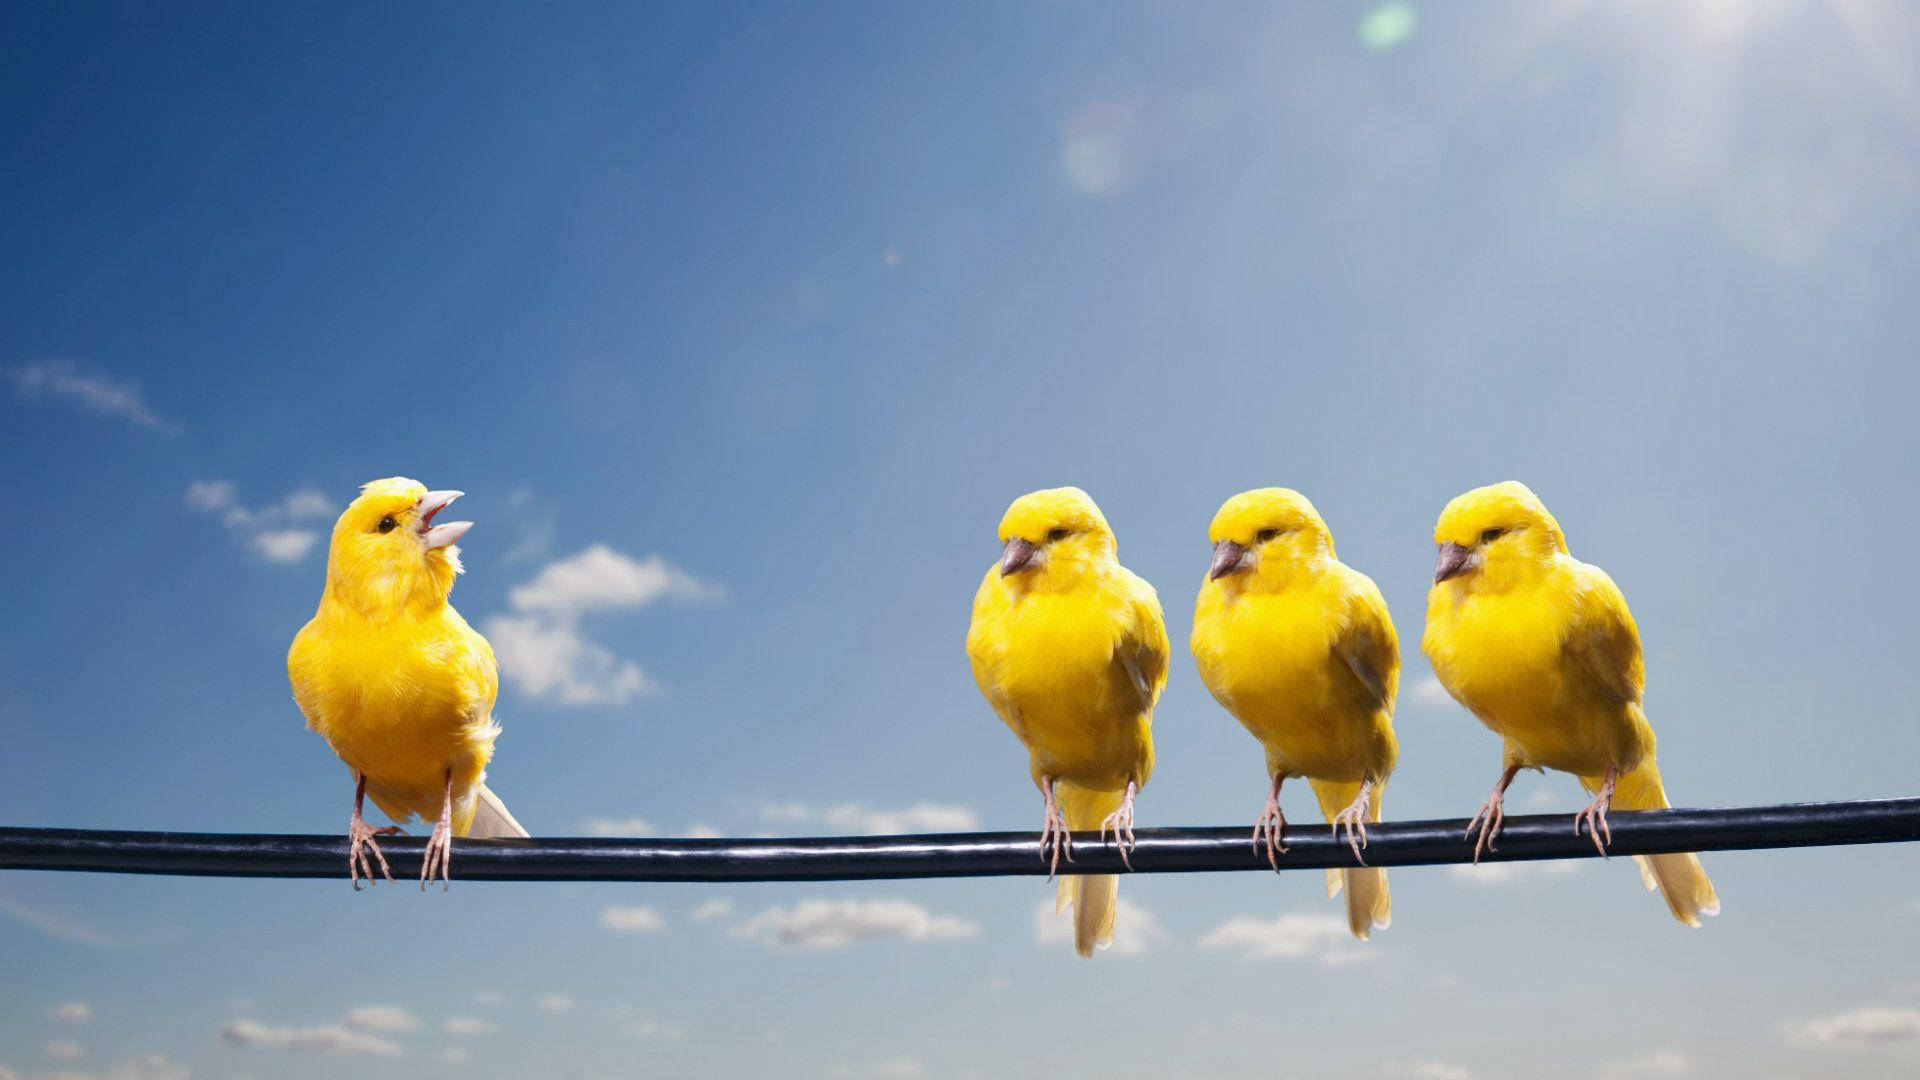 Multiple Yellow Canary Birds Together Wallpaper